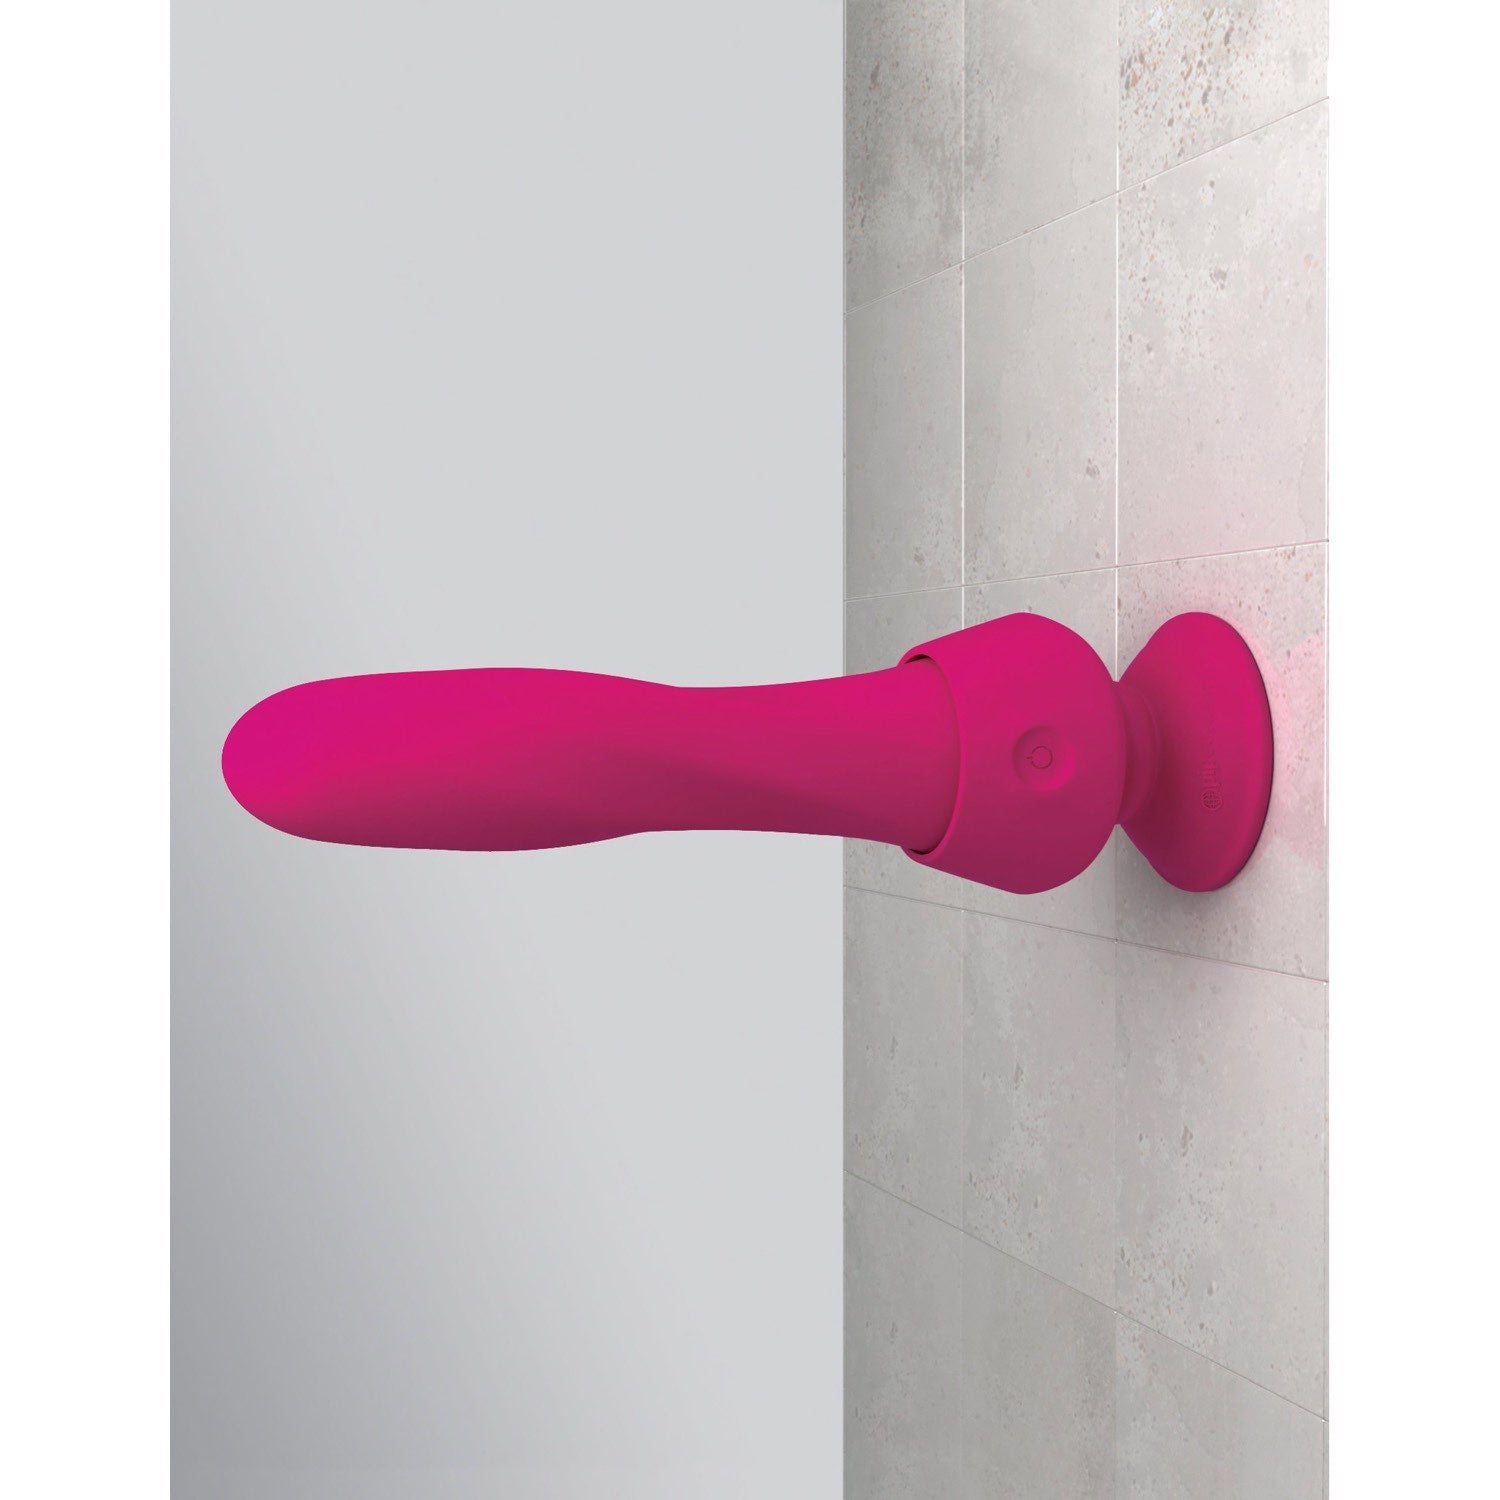 3Some Wall Banger Deluxe - Pink USB Rechargeable Vibrator with Wireless Remote by Pipedream